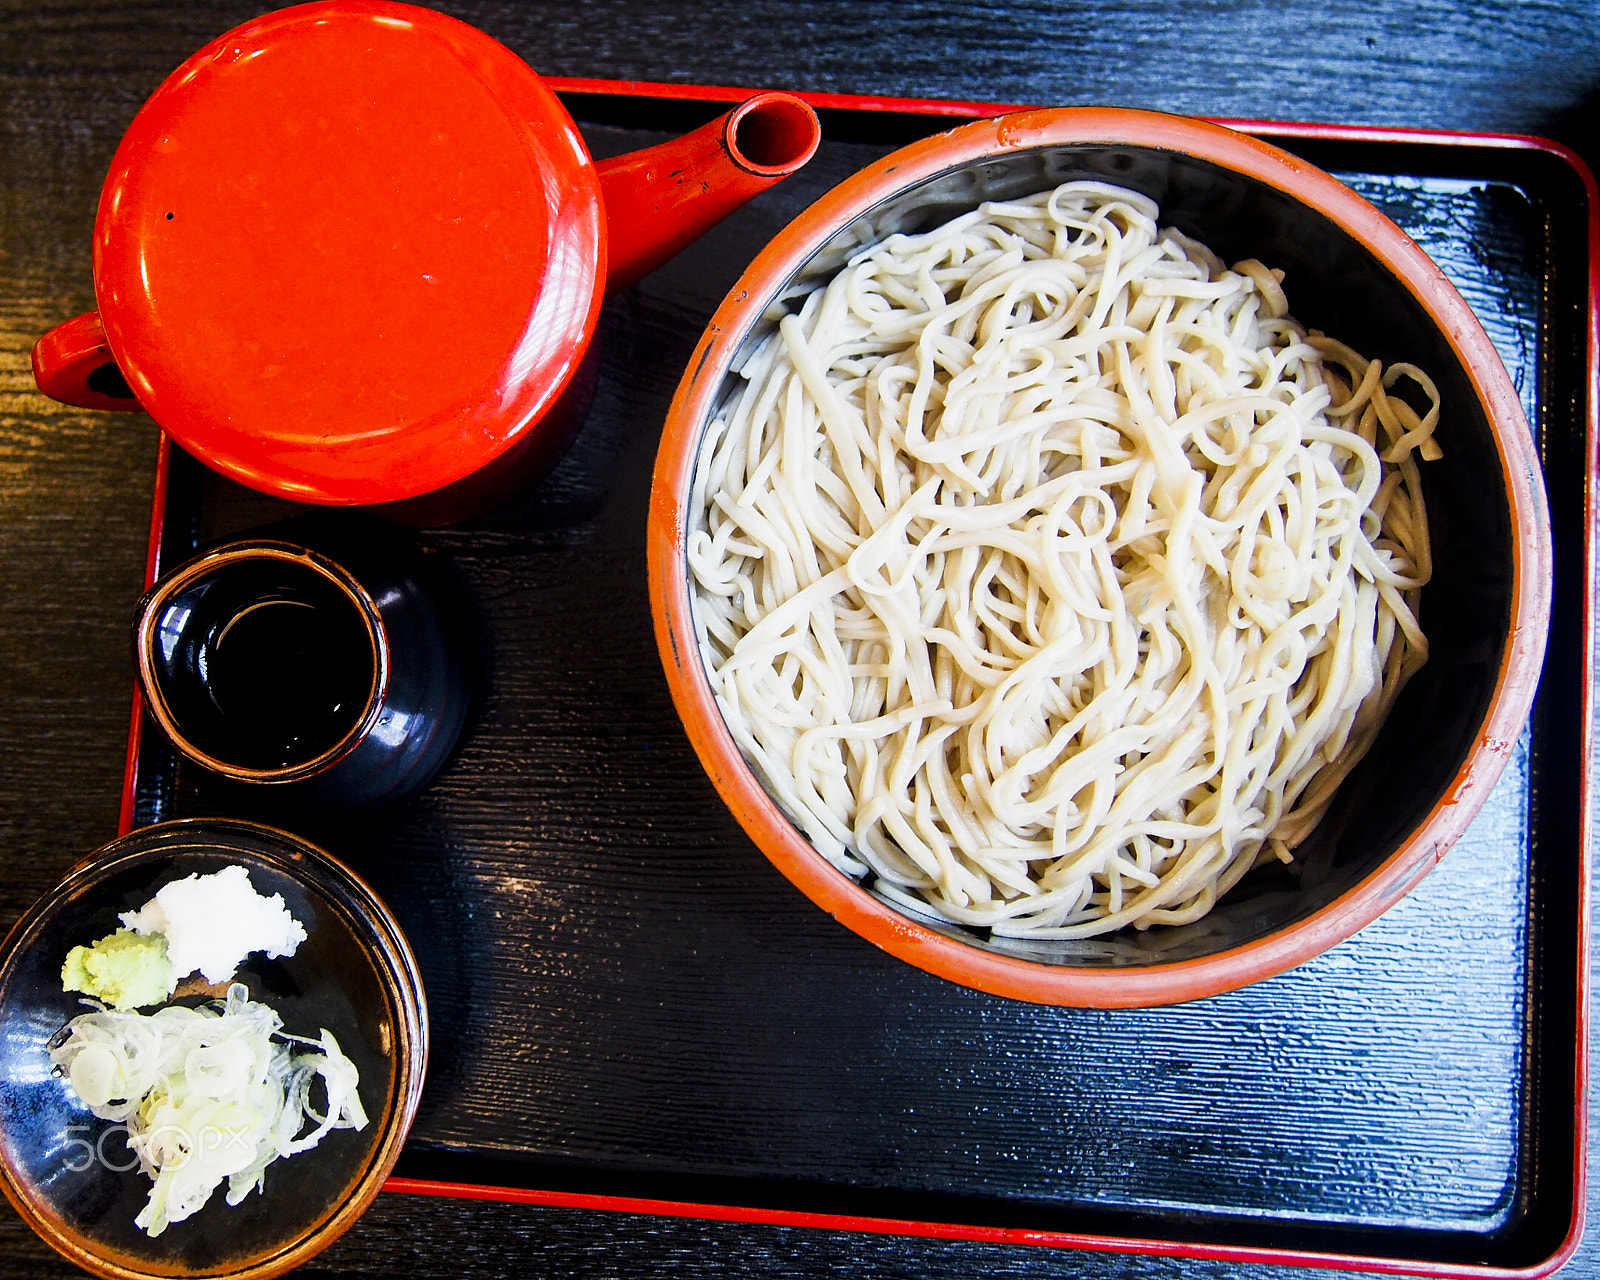 Olympus OM-D E-M5 sample photo. Cold soba noodles photography